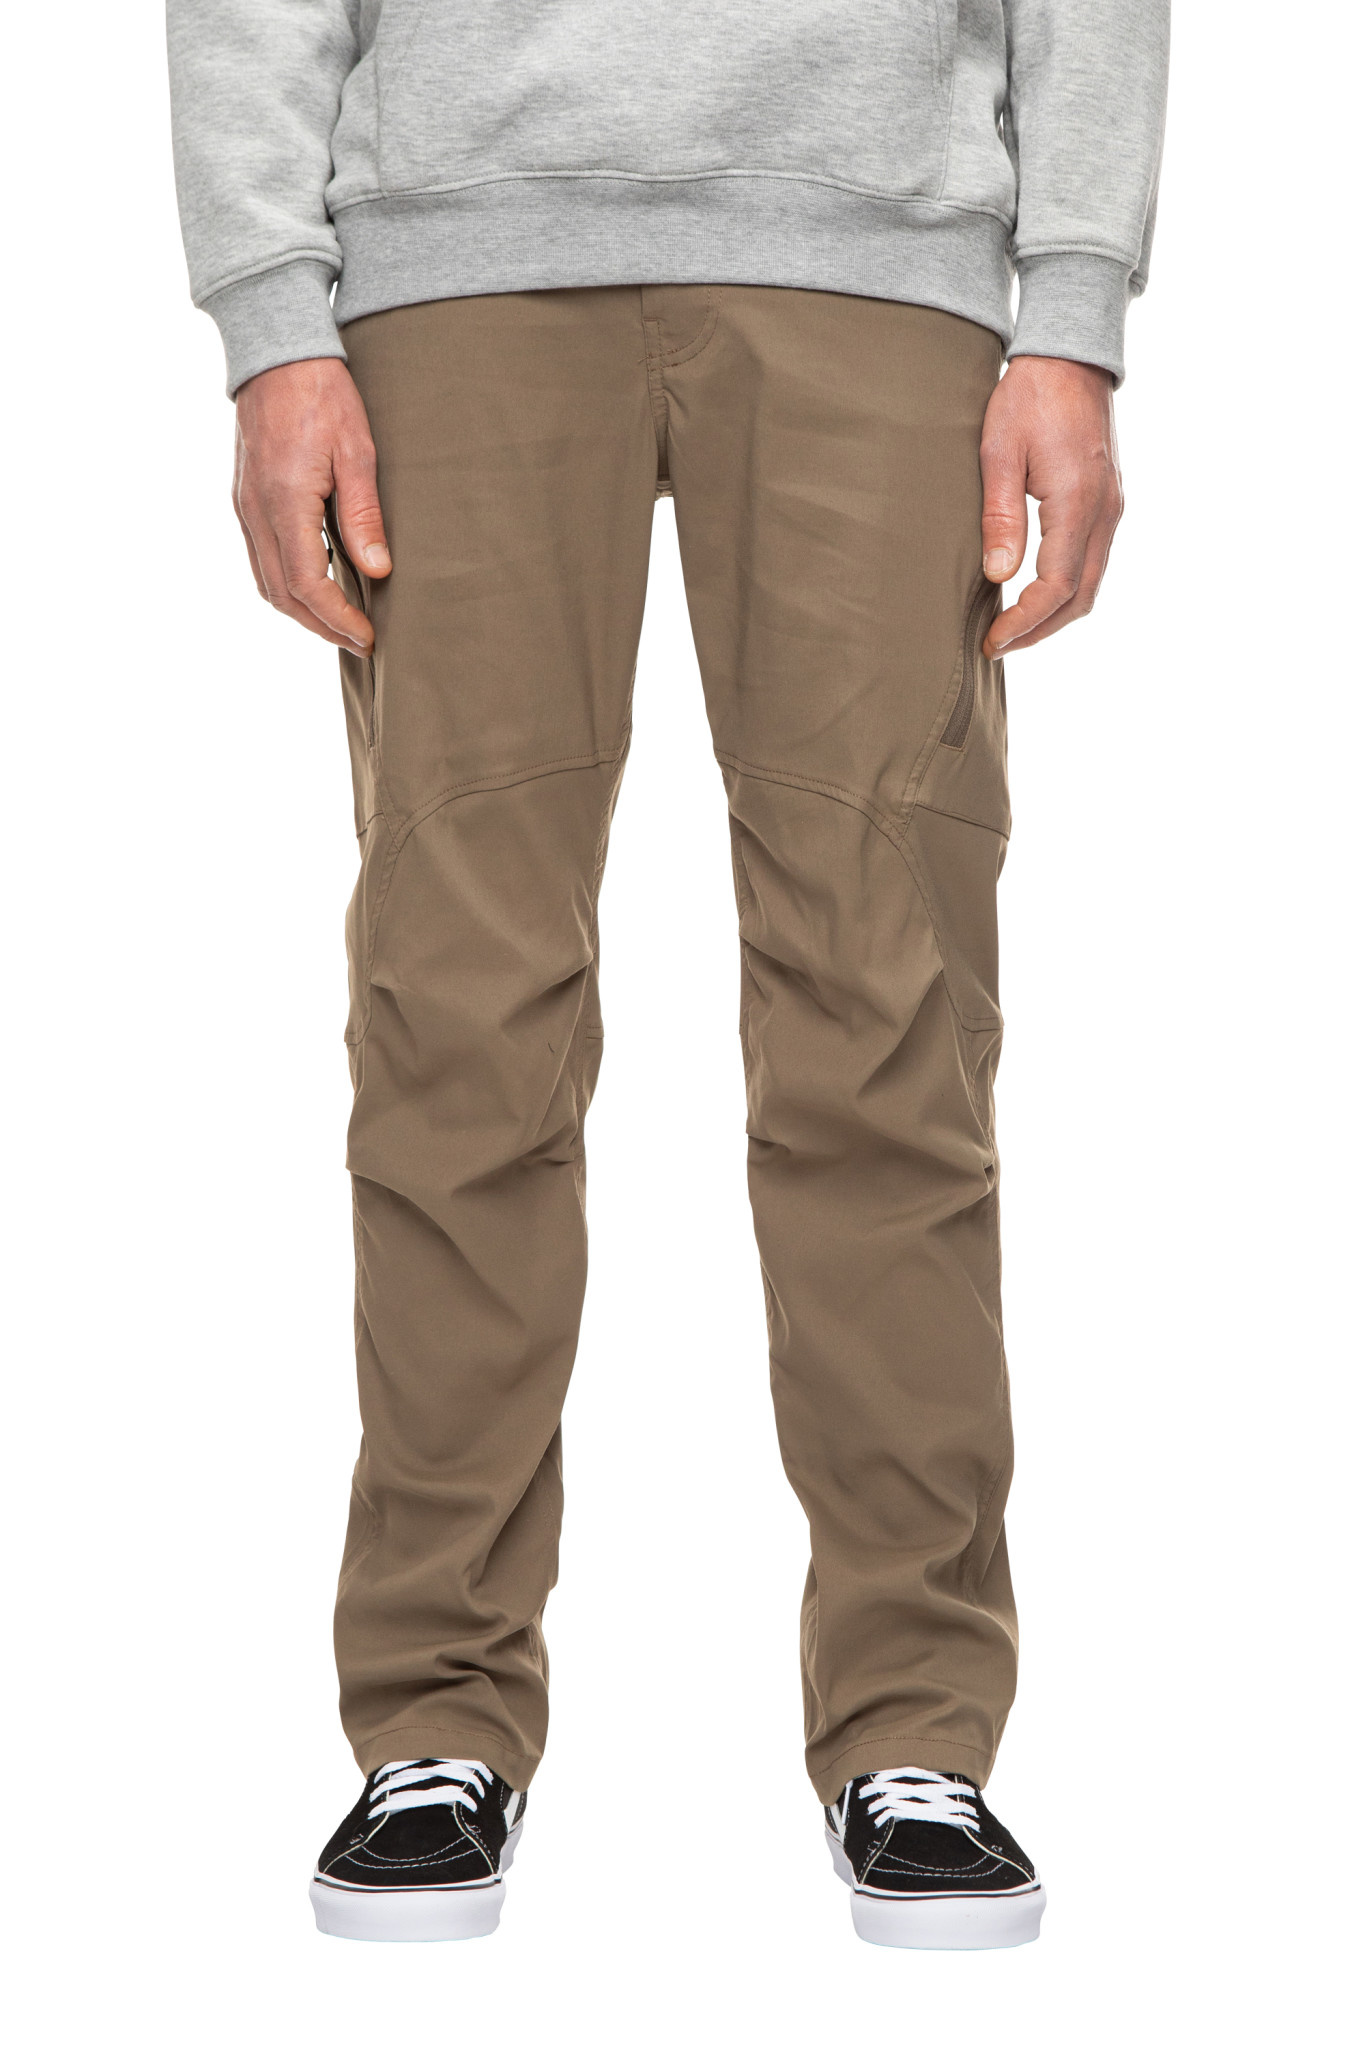 686 686 M's Anything Cargo Pant - Relaxed Fit